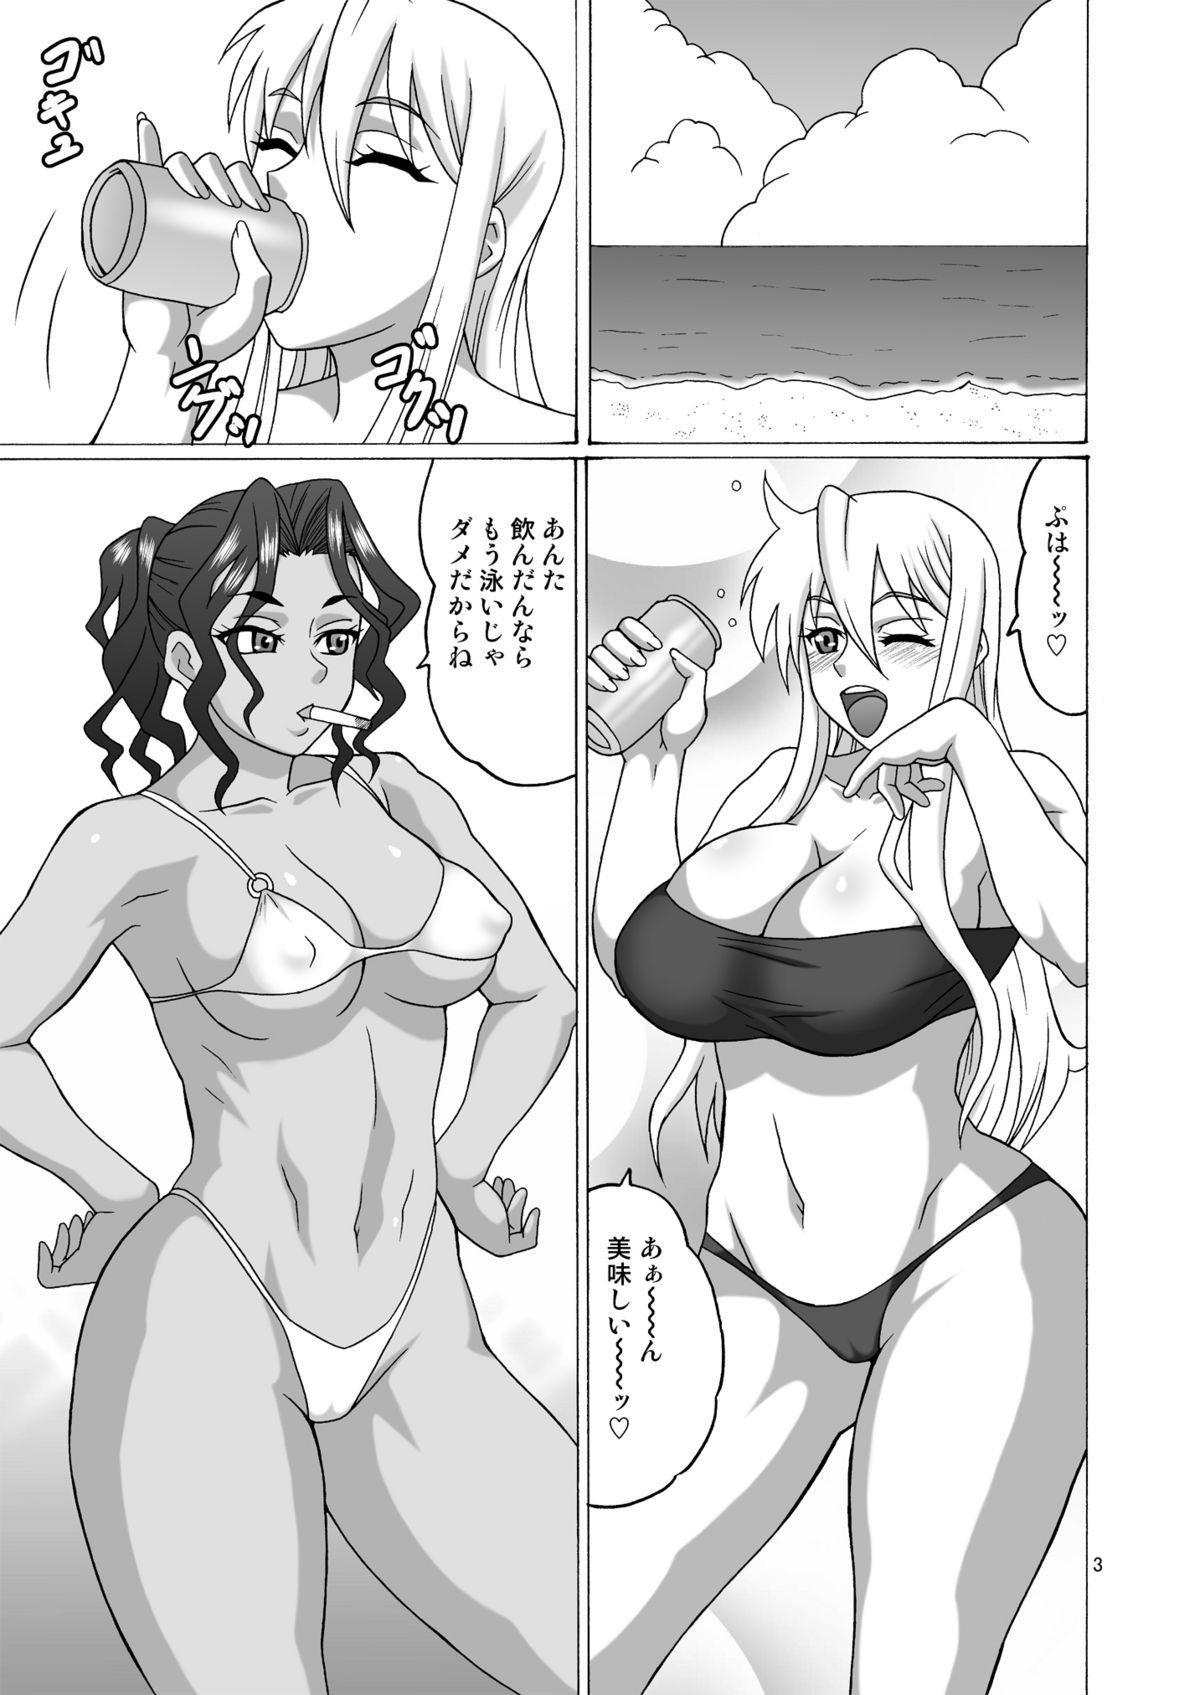 Groupfuck Beach no BITCH - Highschool of the dead Wet Cunt - Page 2